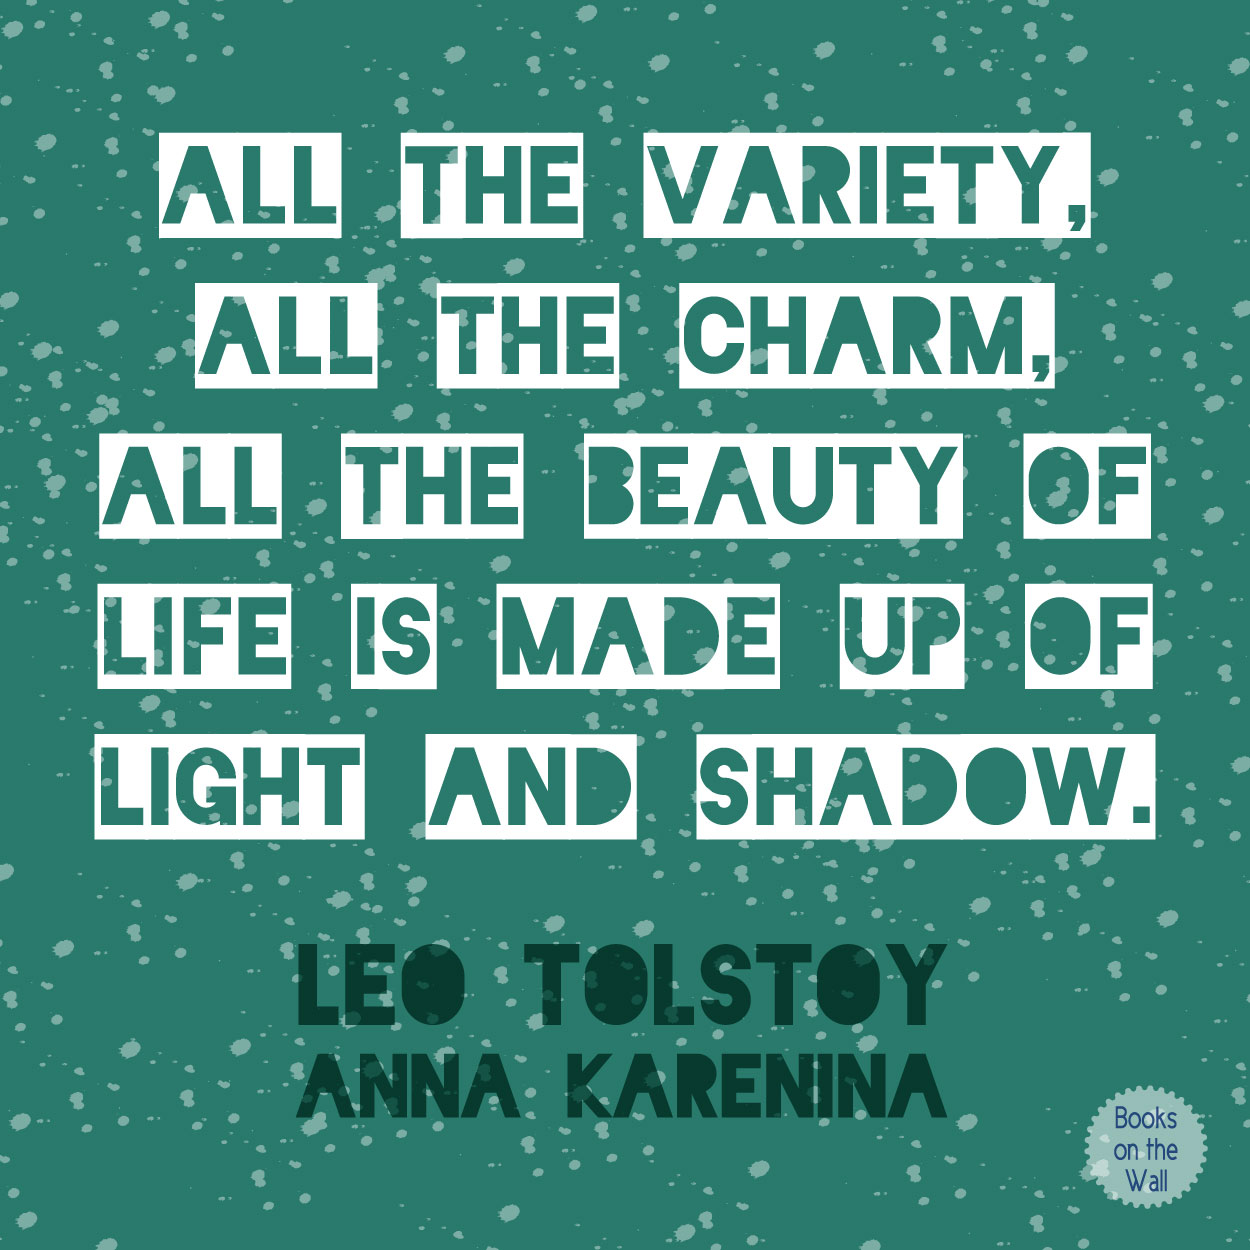 Leo Tolstoy quote graphic from Anna Karenina by Books on the Wall